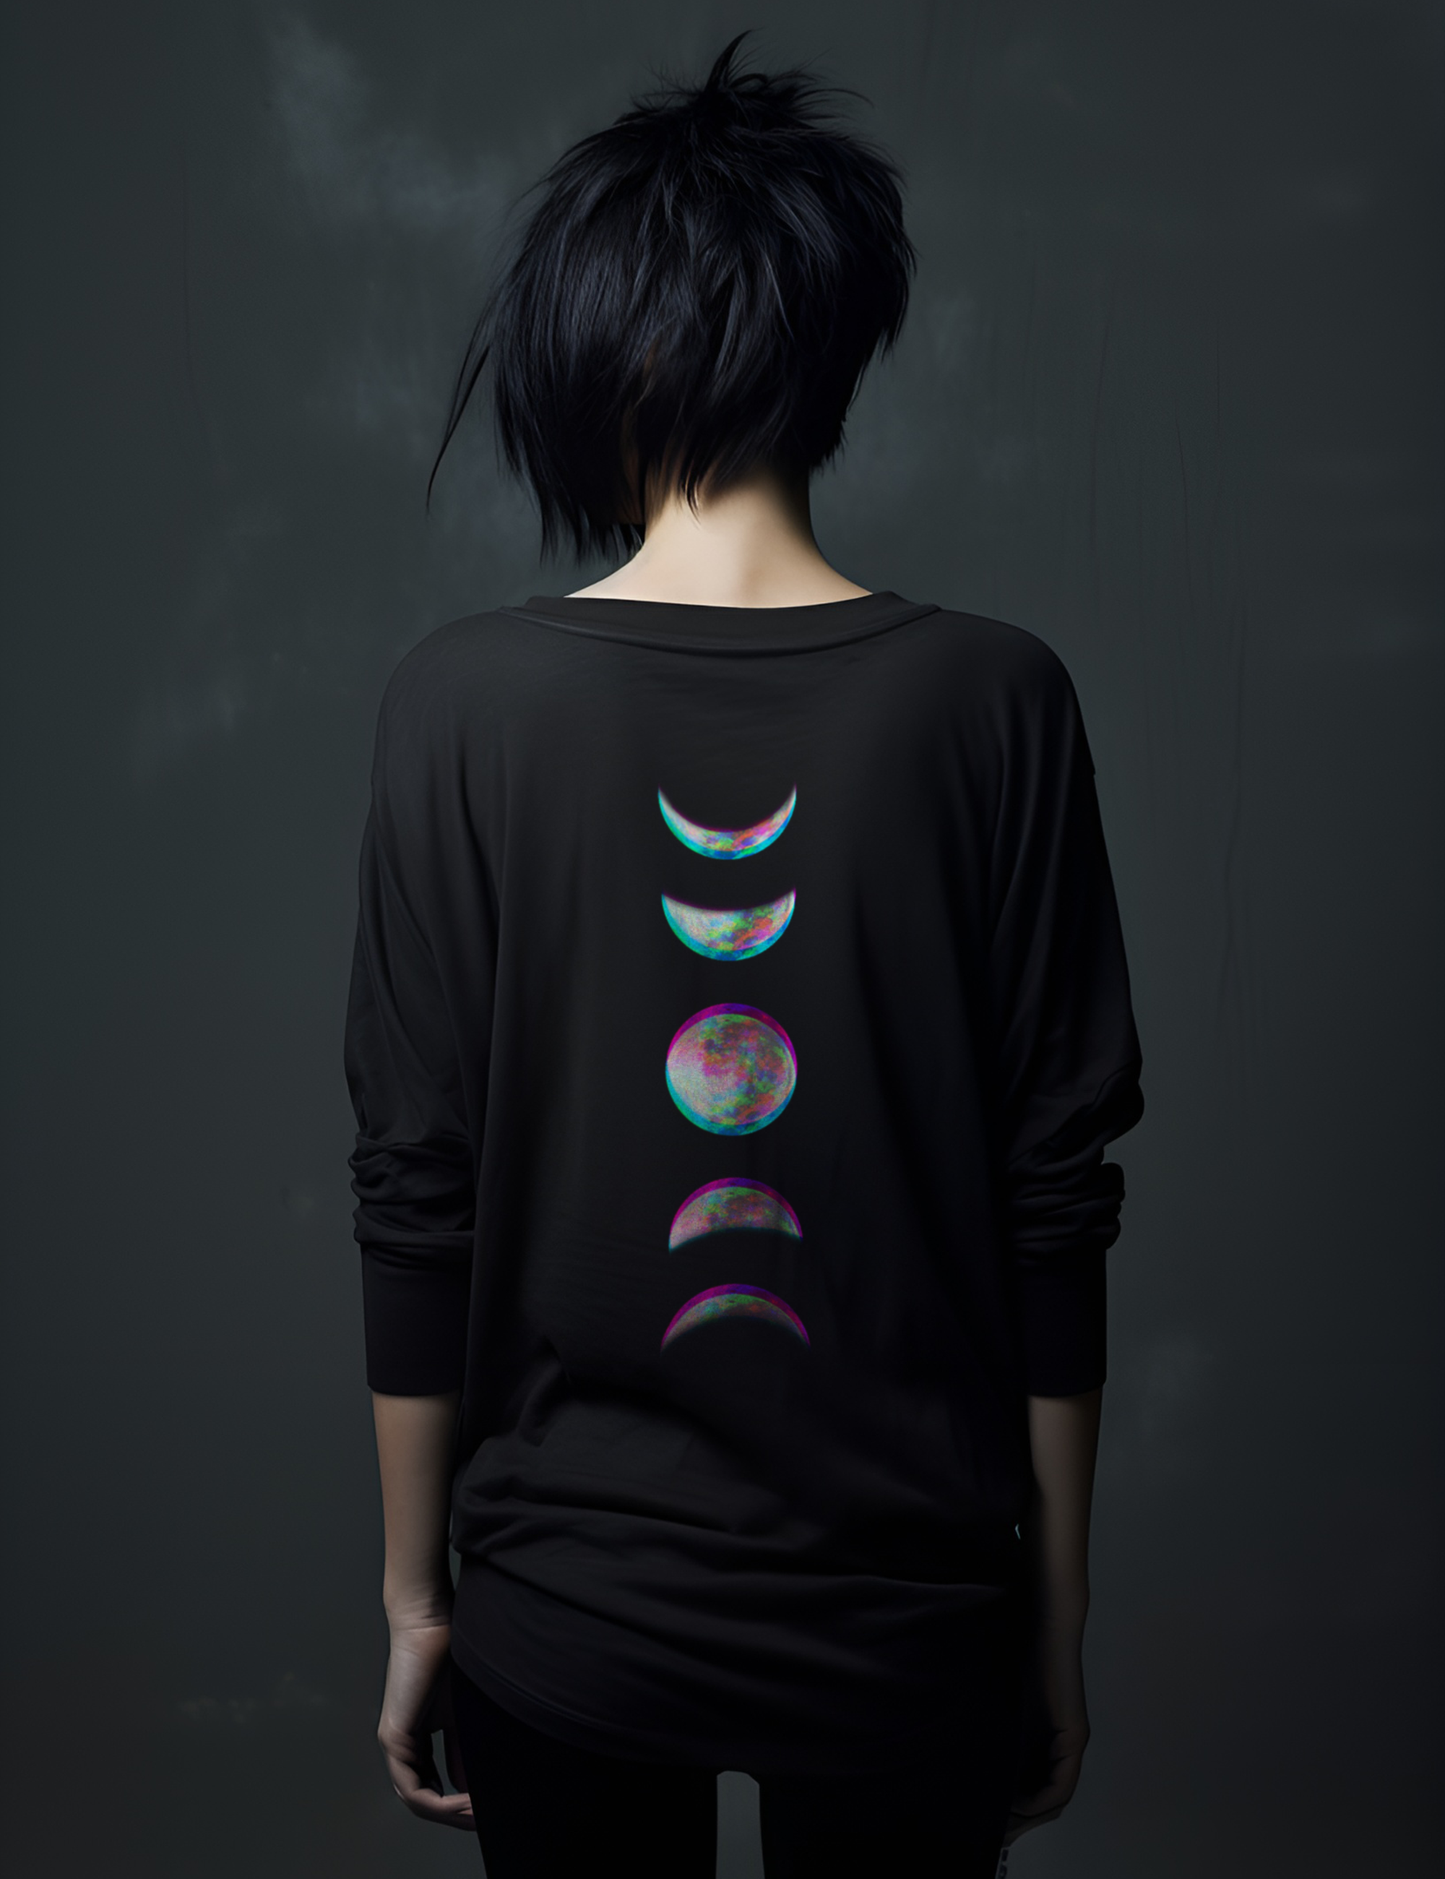 Glitch Moon Phase Edgy Plus Size Goth Witchy Long Sleeve Women's Shirt